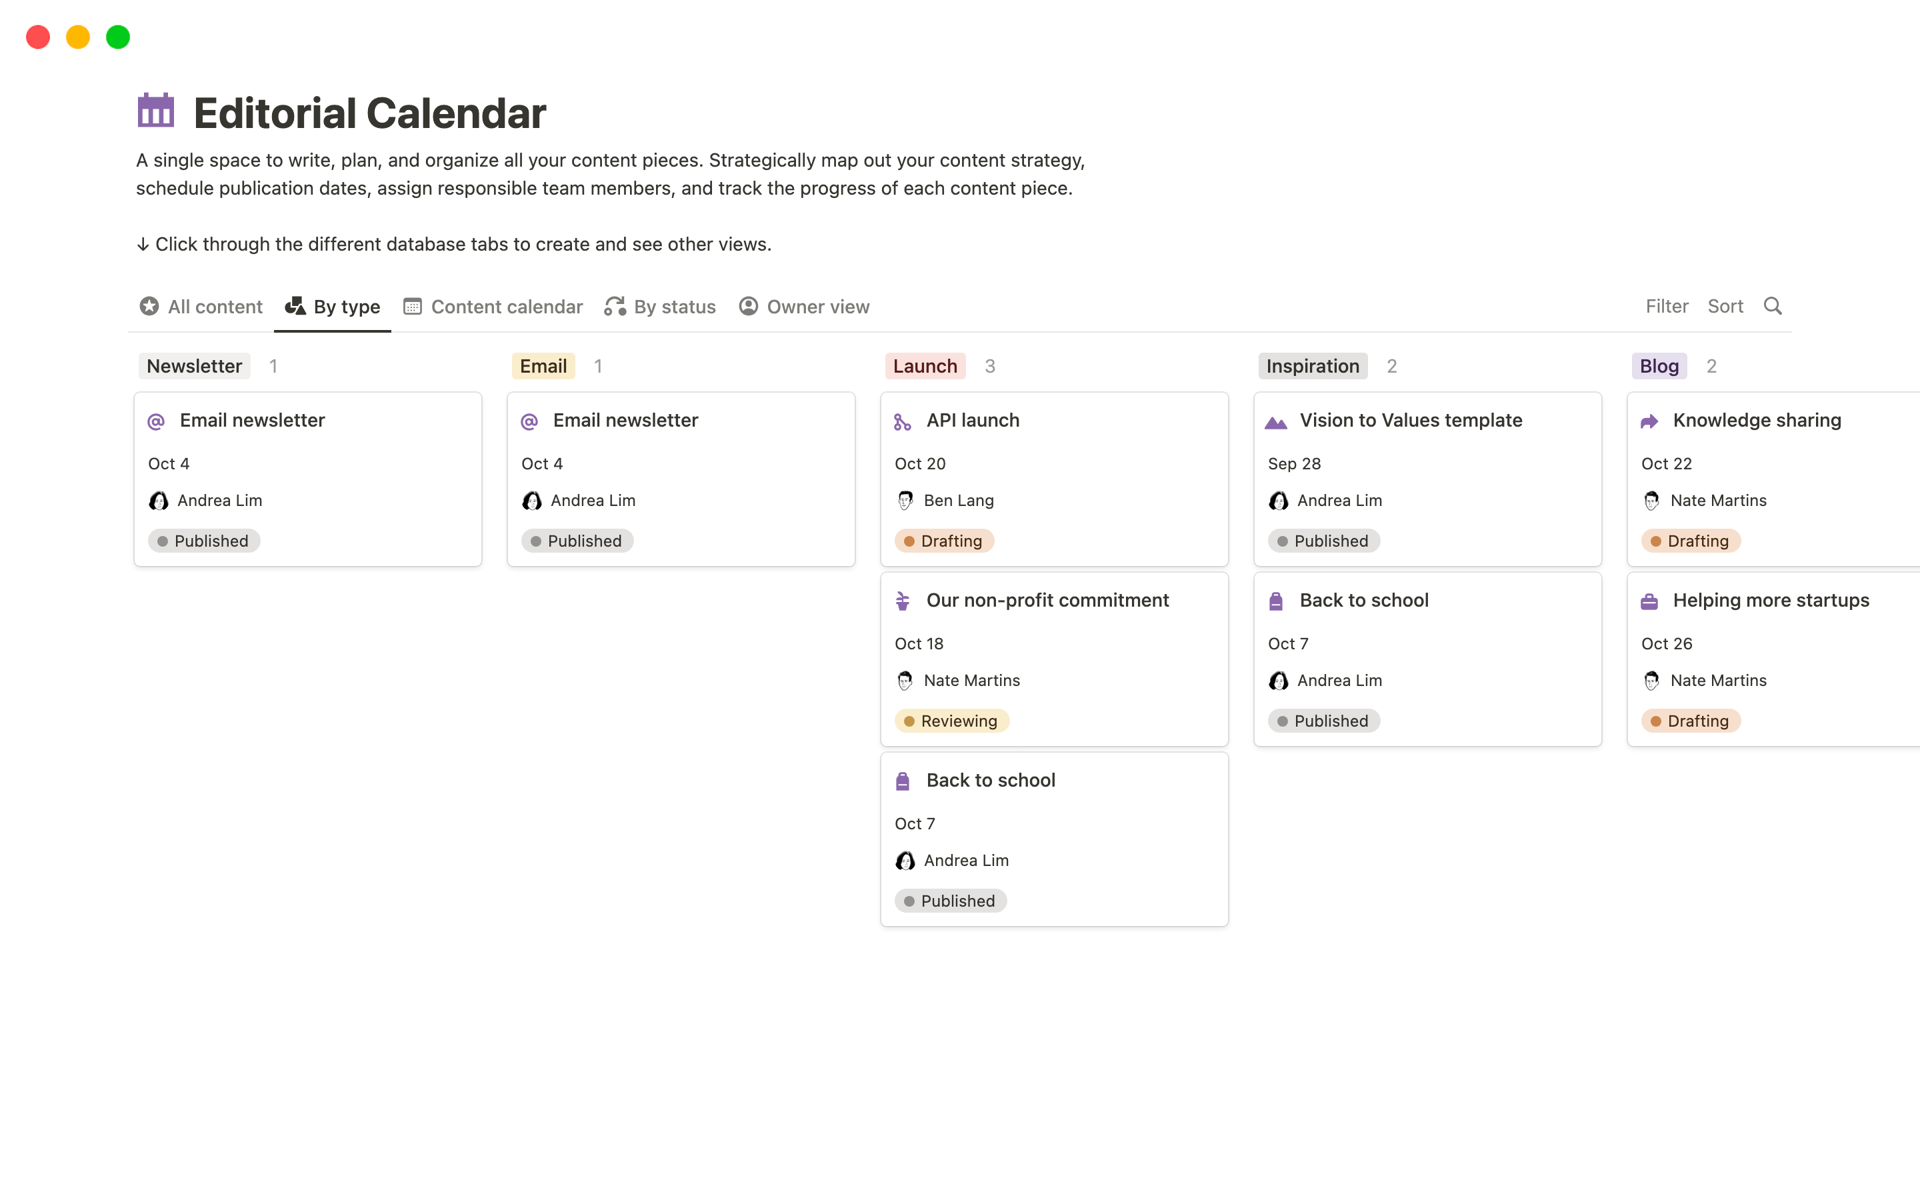 Streamline your content creation process with our versatile Editorial Calendar template.